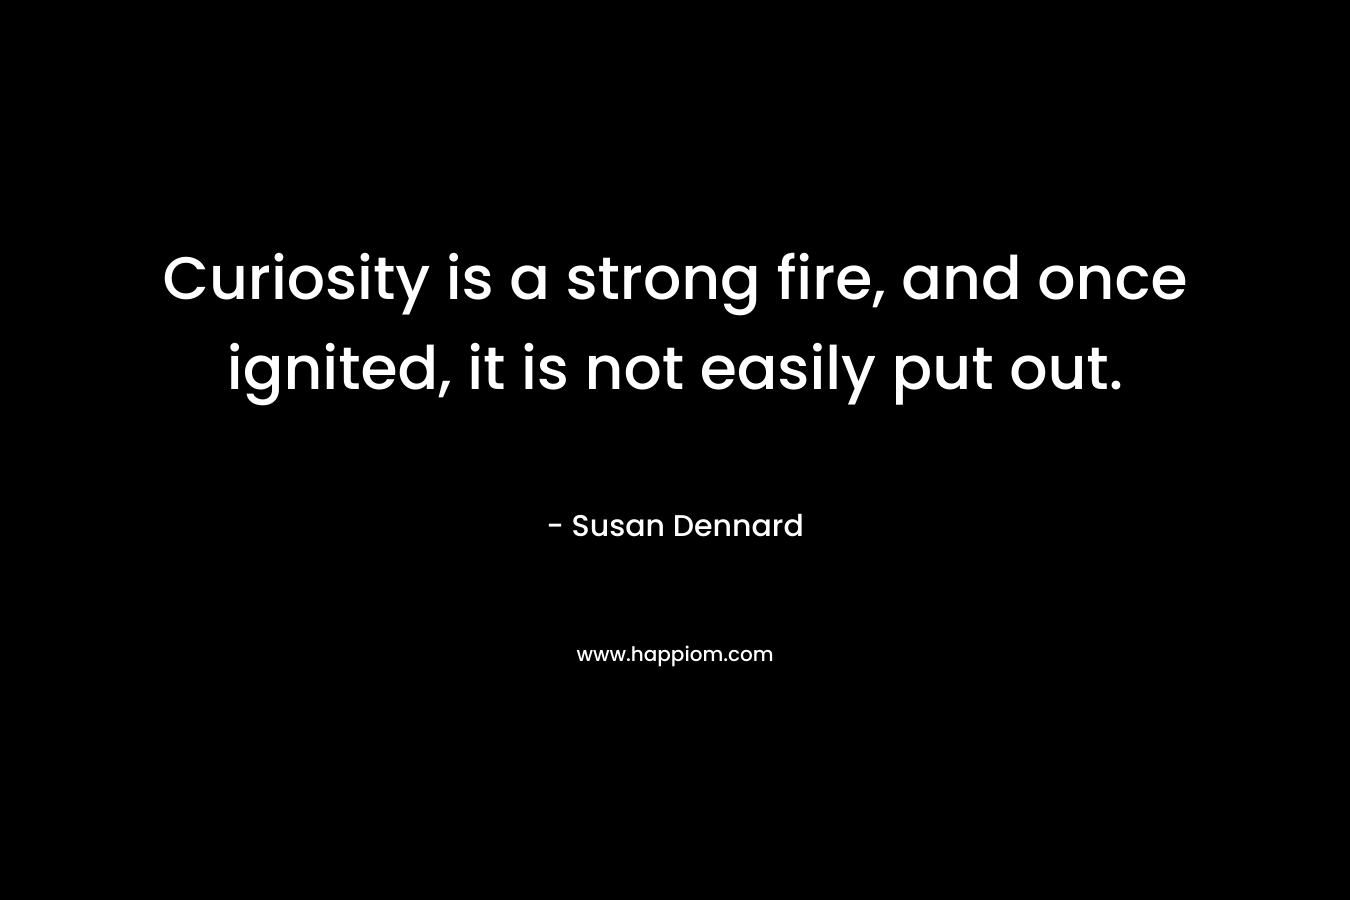 Curiosity is a strong fire, and once ignited, it is not easily put out.